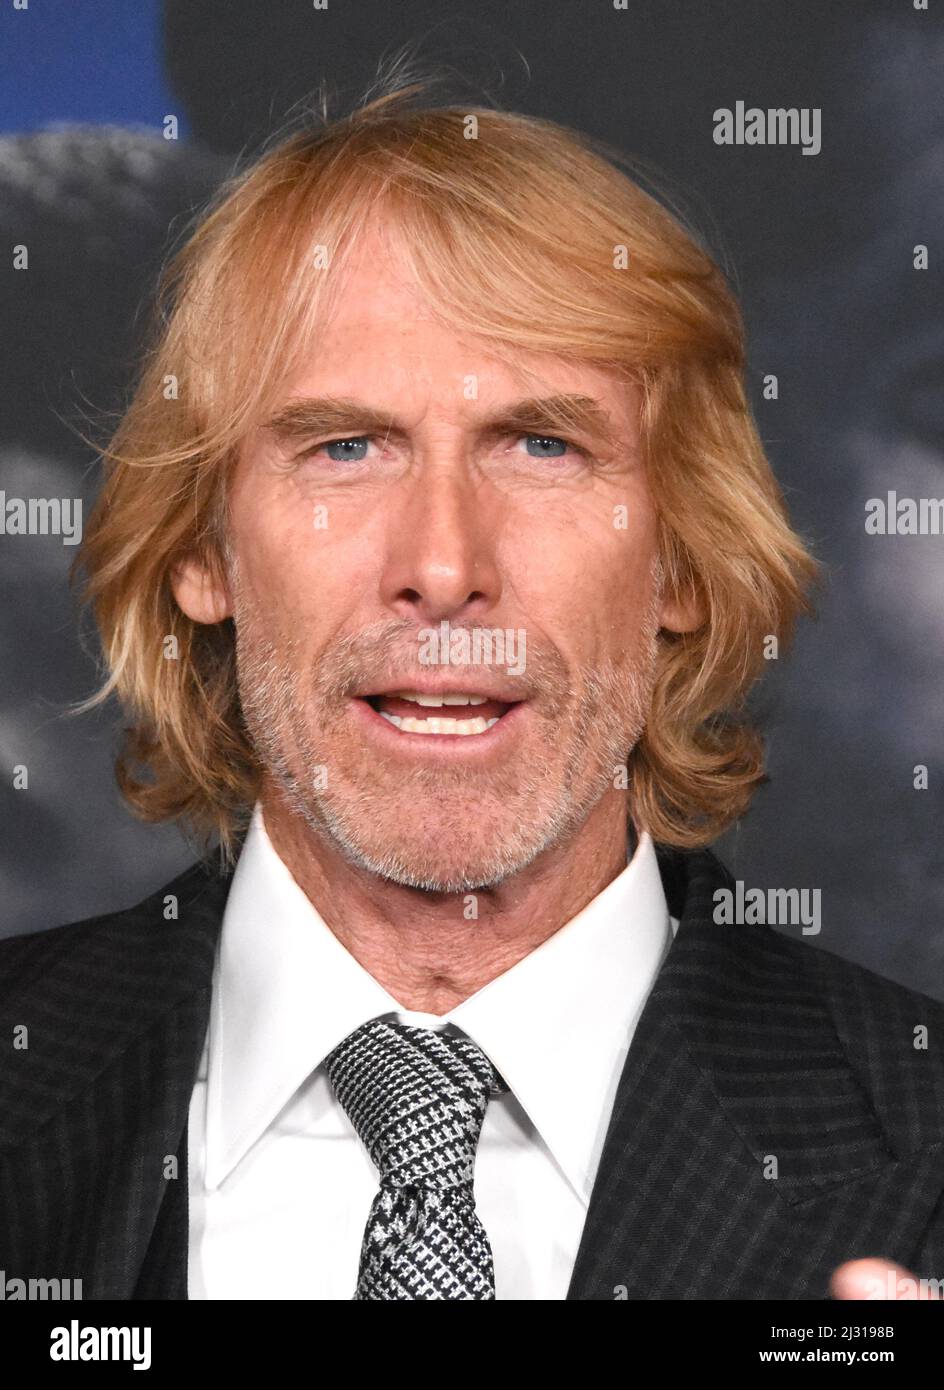 Los Angeles, California, USA 4th April 2022 Director/producer Michael Bay attends the Los Angeles Premiere of Universal Pictures 'Ambulance' at Academy Museum of Motion Pictures on April 4, 2022 in Los Angeles, California, USA. Photo by Barry King/Alamy Live News Stock Photo